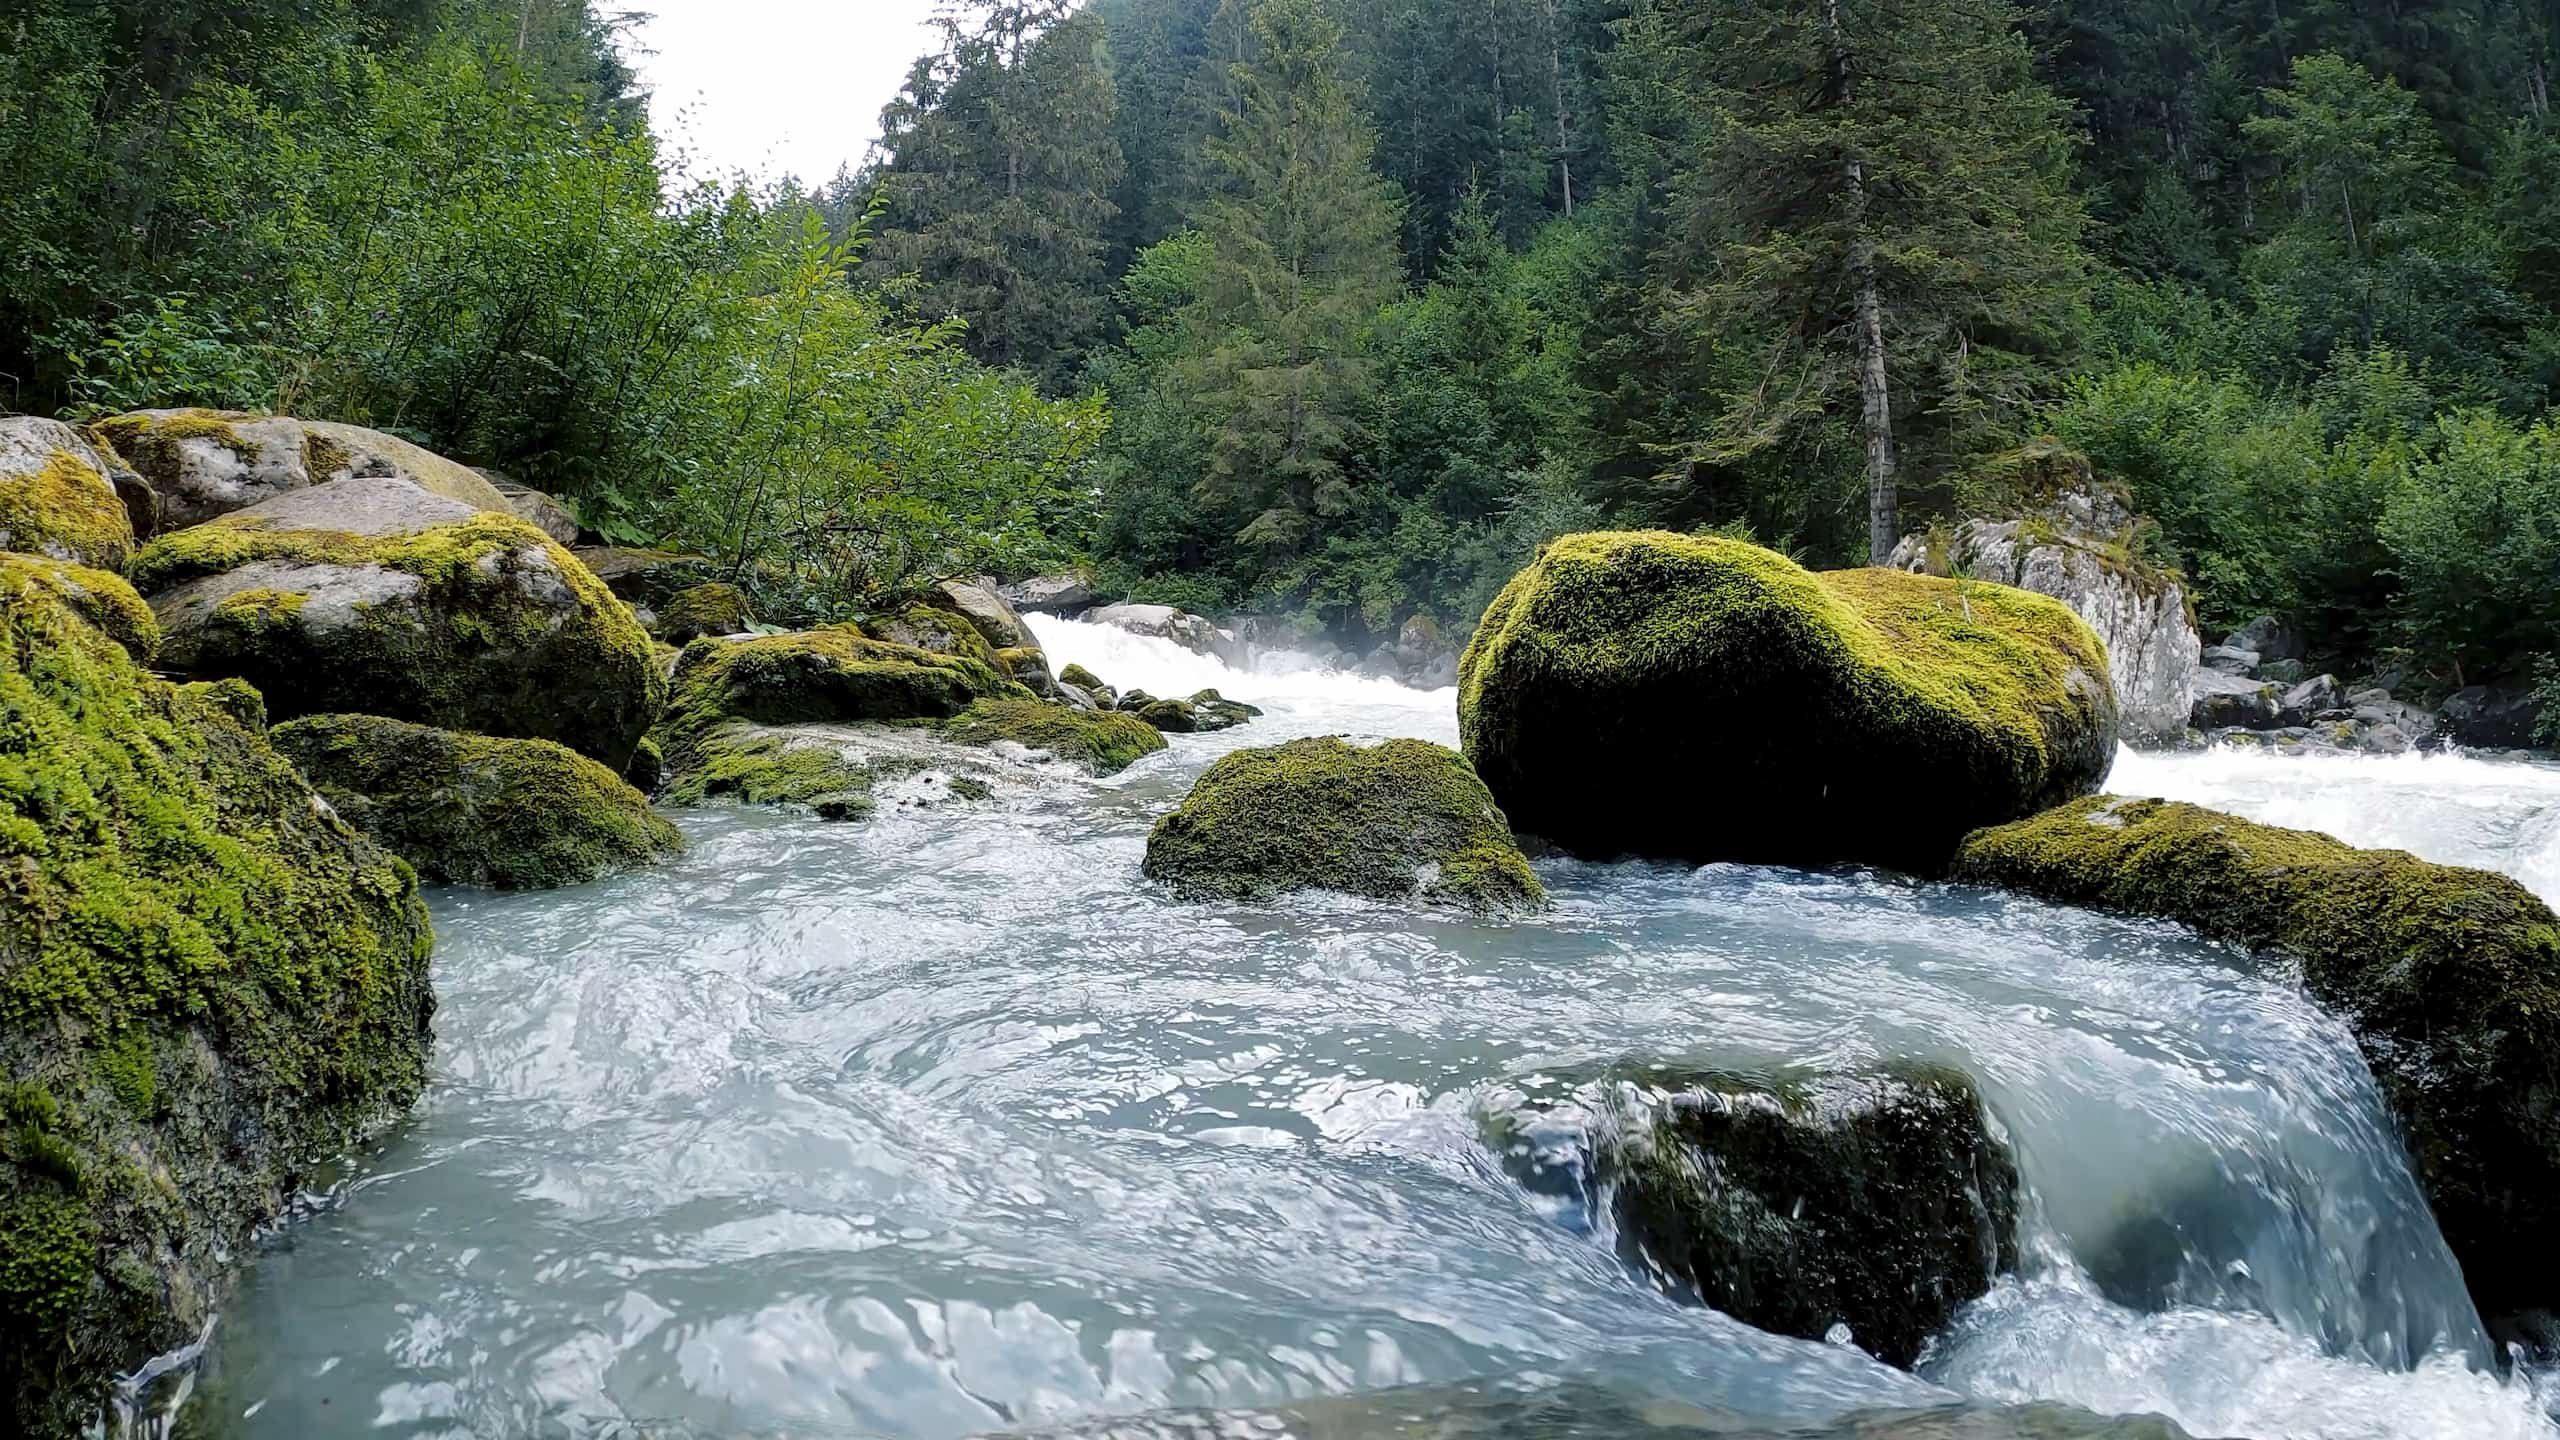 A flowing river